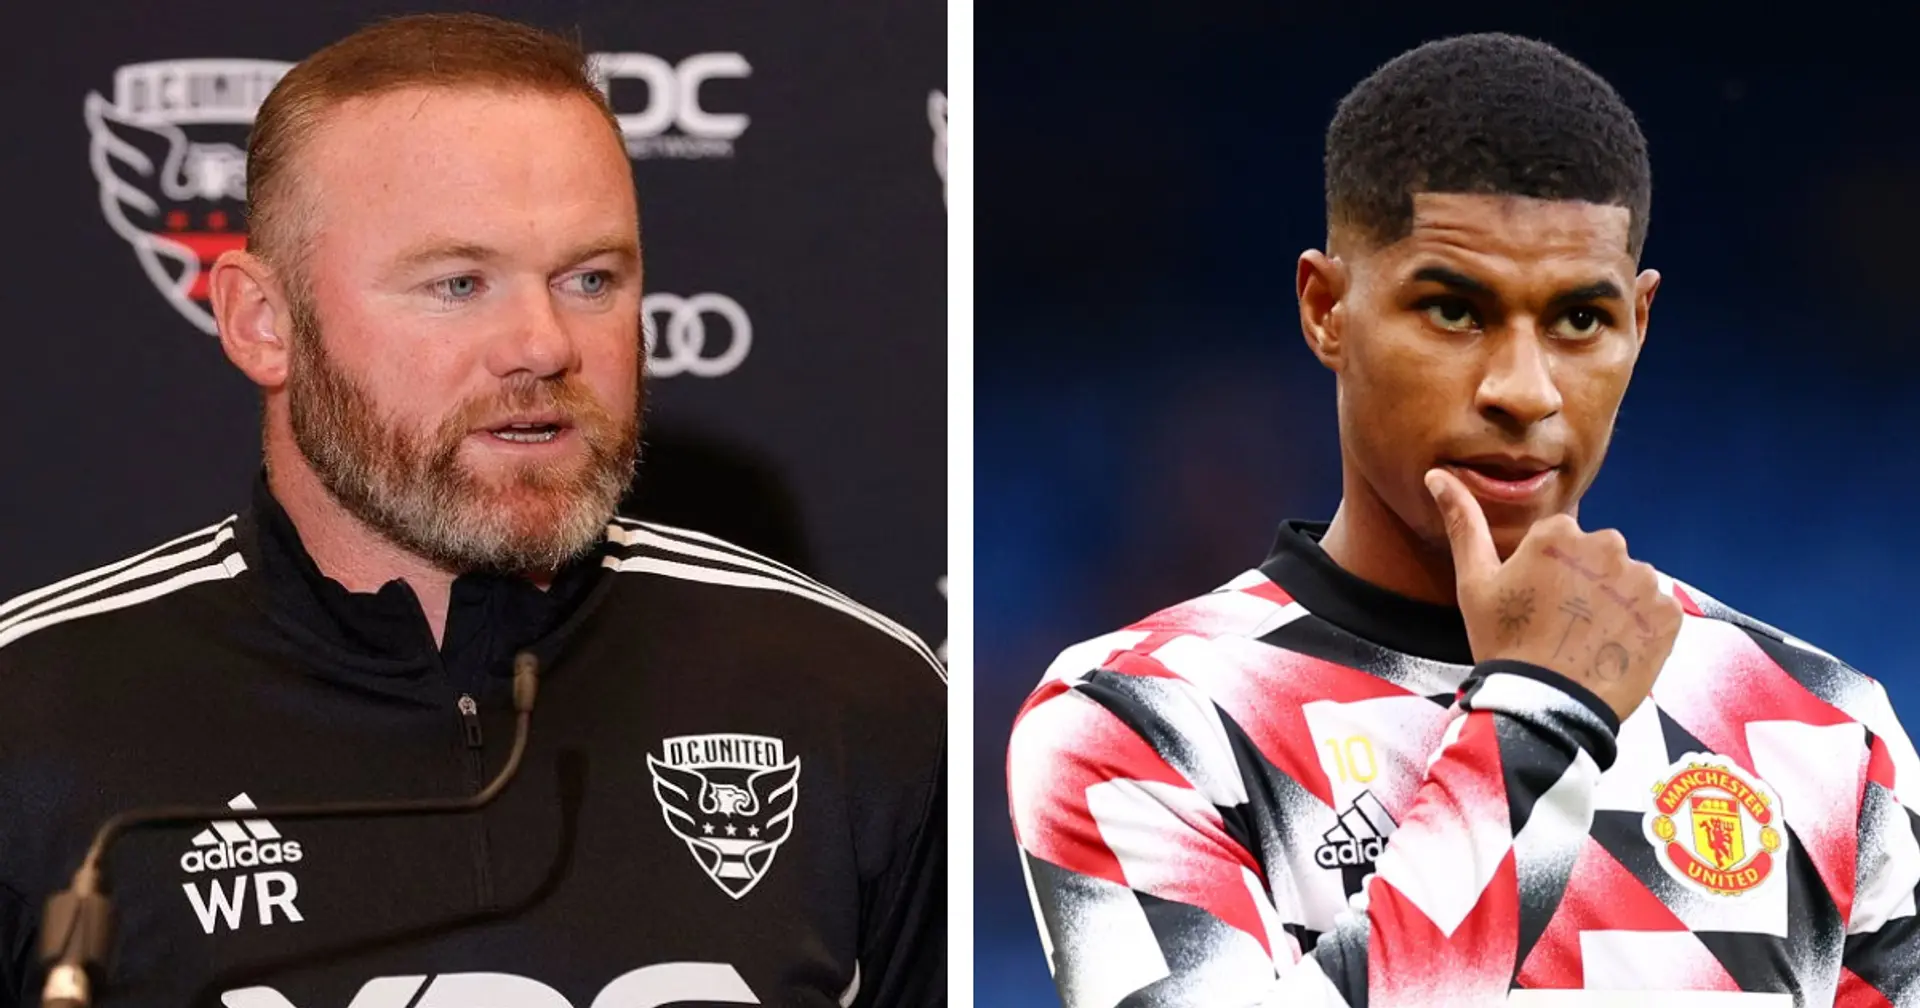 'He looks like he's back in a good place': Rooney reacts to Rashford's inclusion in World Cup squad